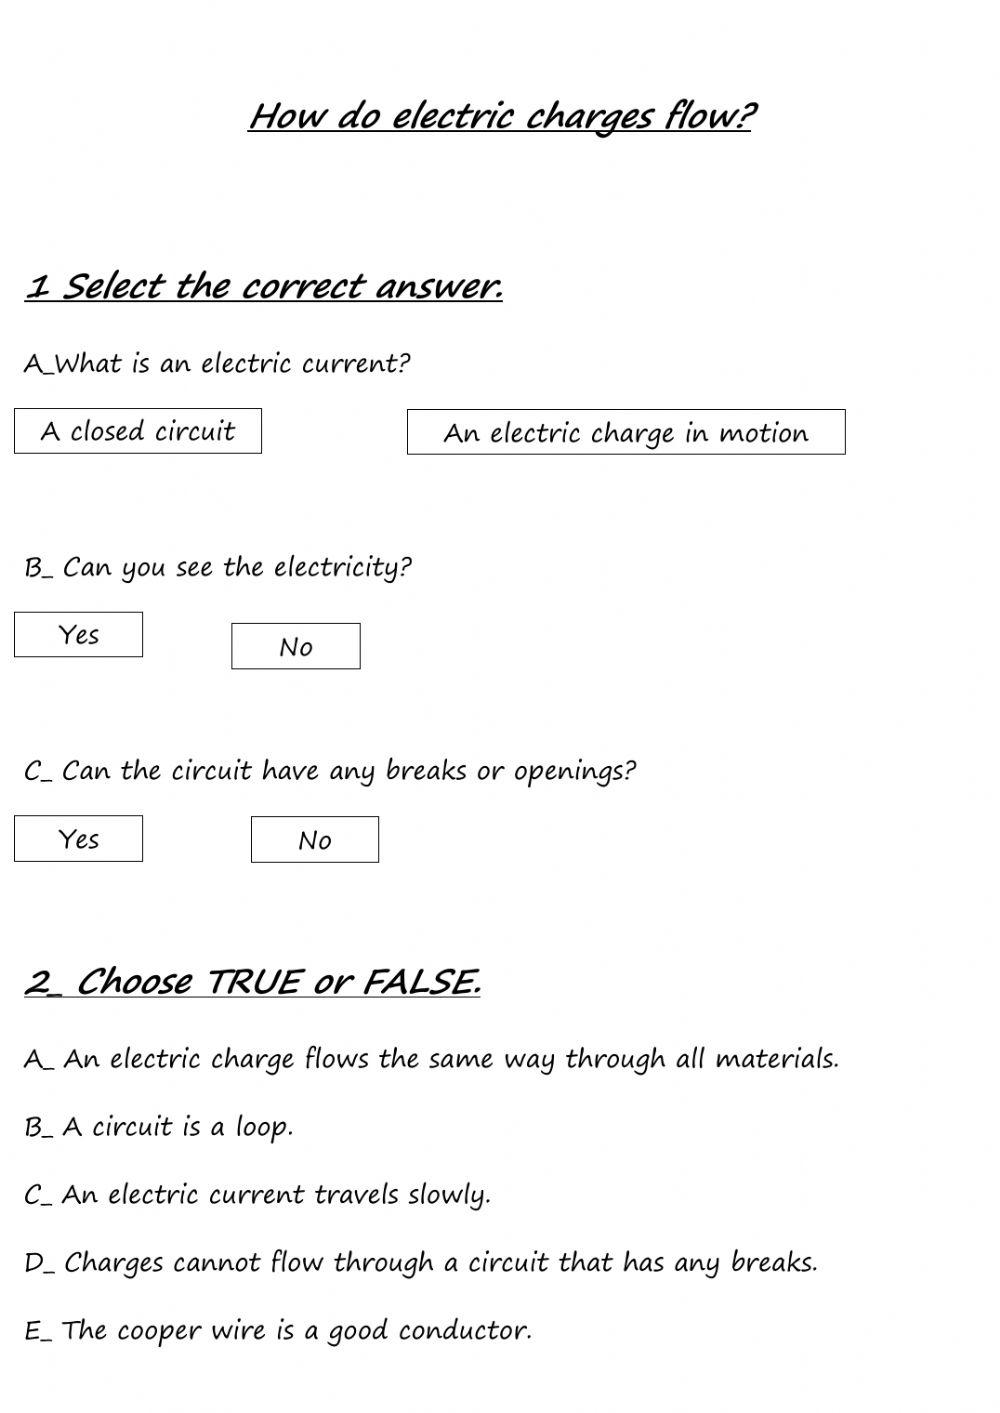 How do electrics charges flow?